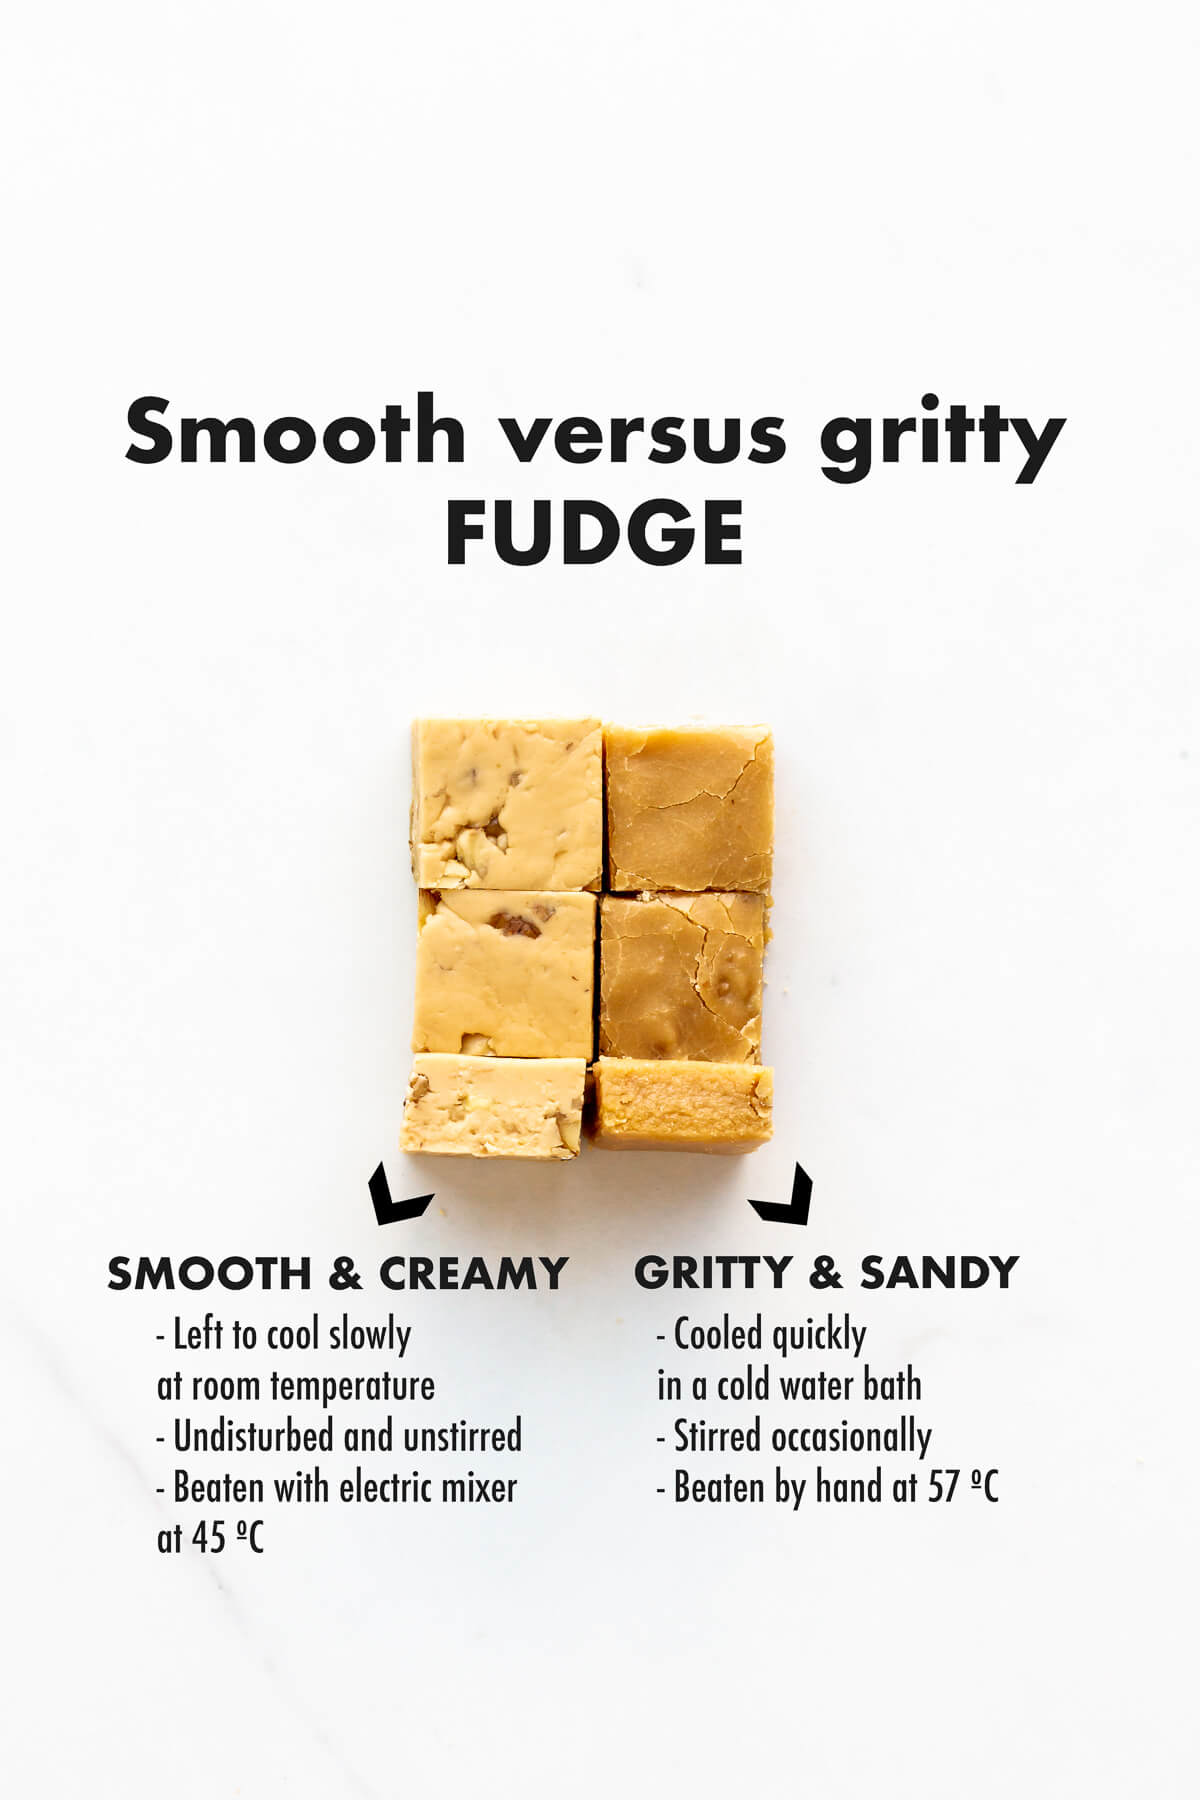 Smooth versus gritty fudge comparison: smooth fudge is cooled slowly and beaten at 45 ºC, while gritty fudge is cooled quickly and beaten at 57 ºC.